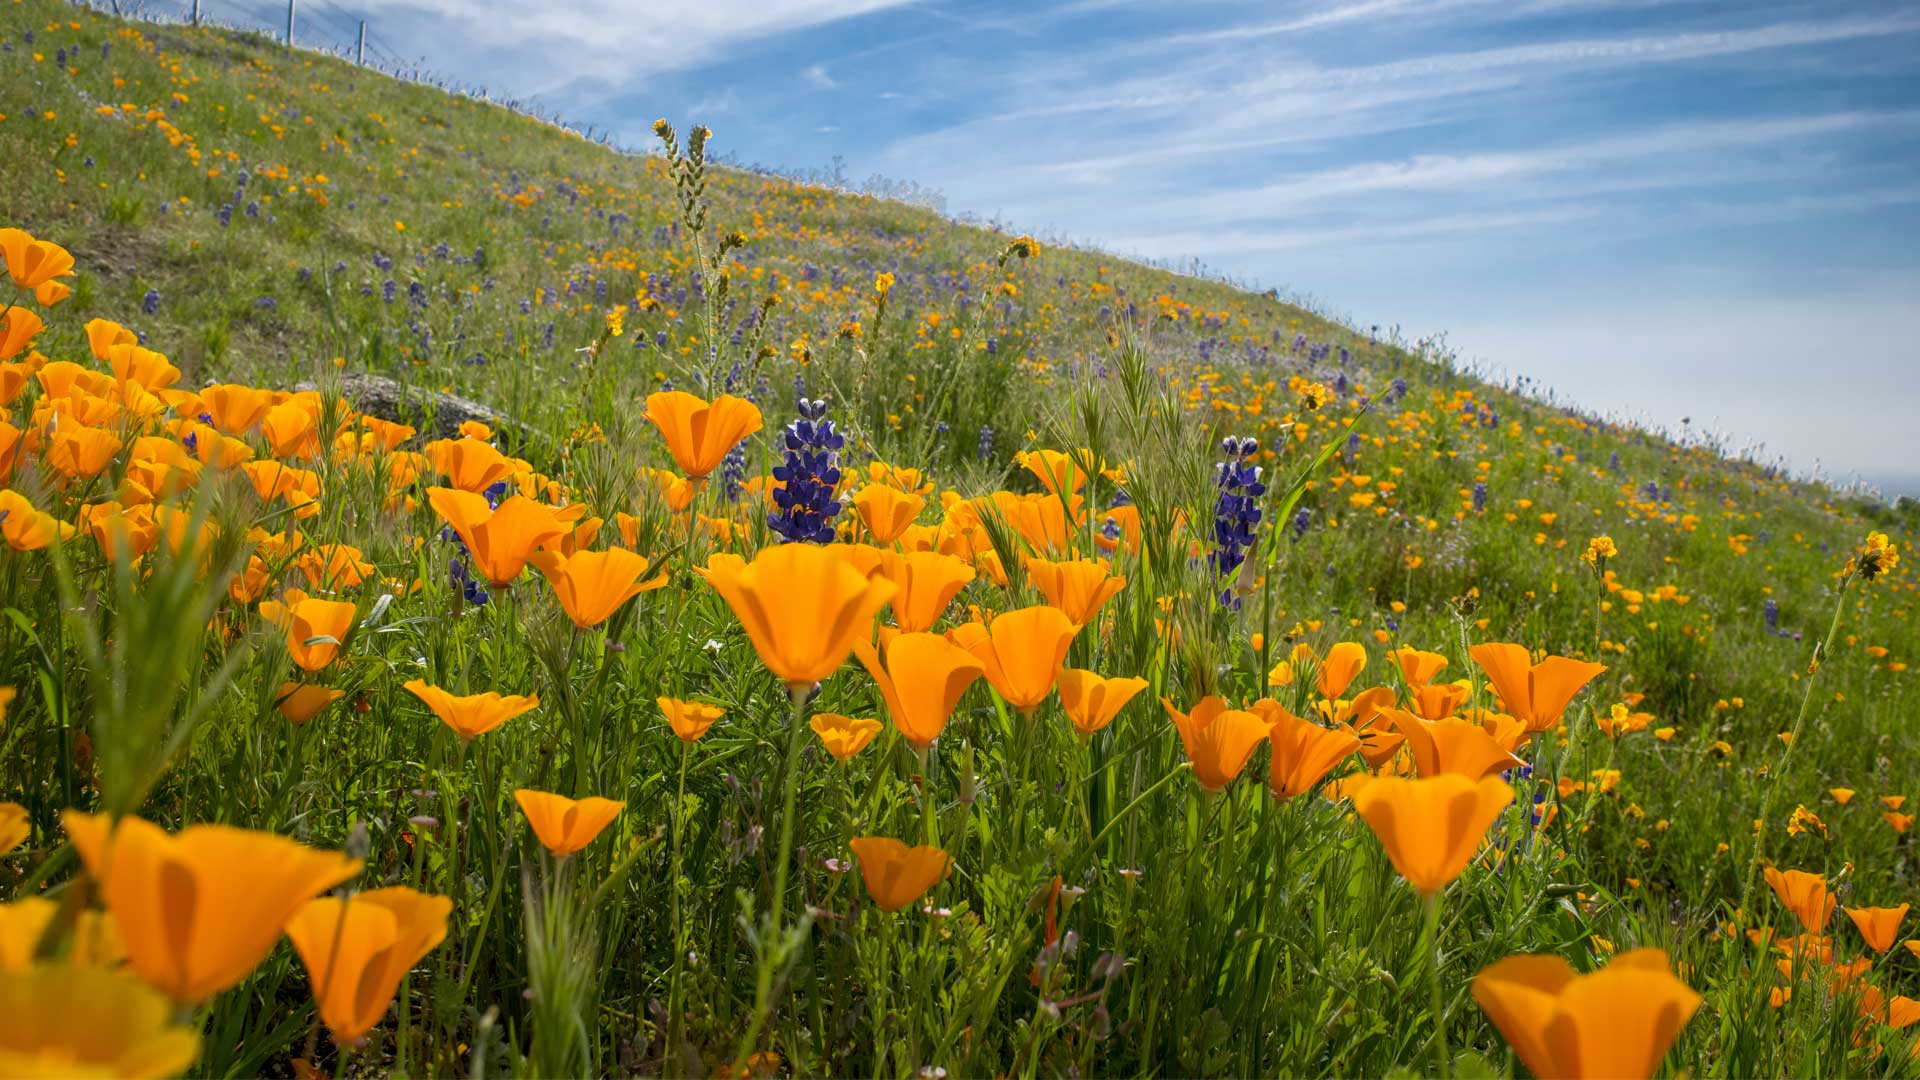 Kern County Wildflowers - Kern County, California | Official Tourism ...